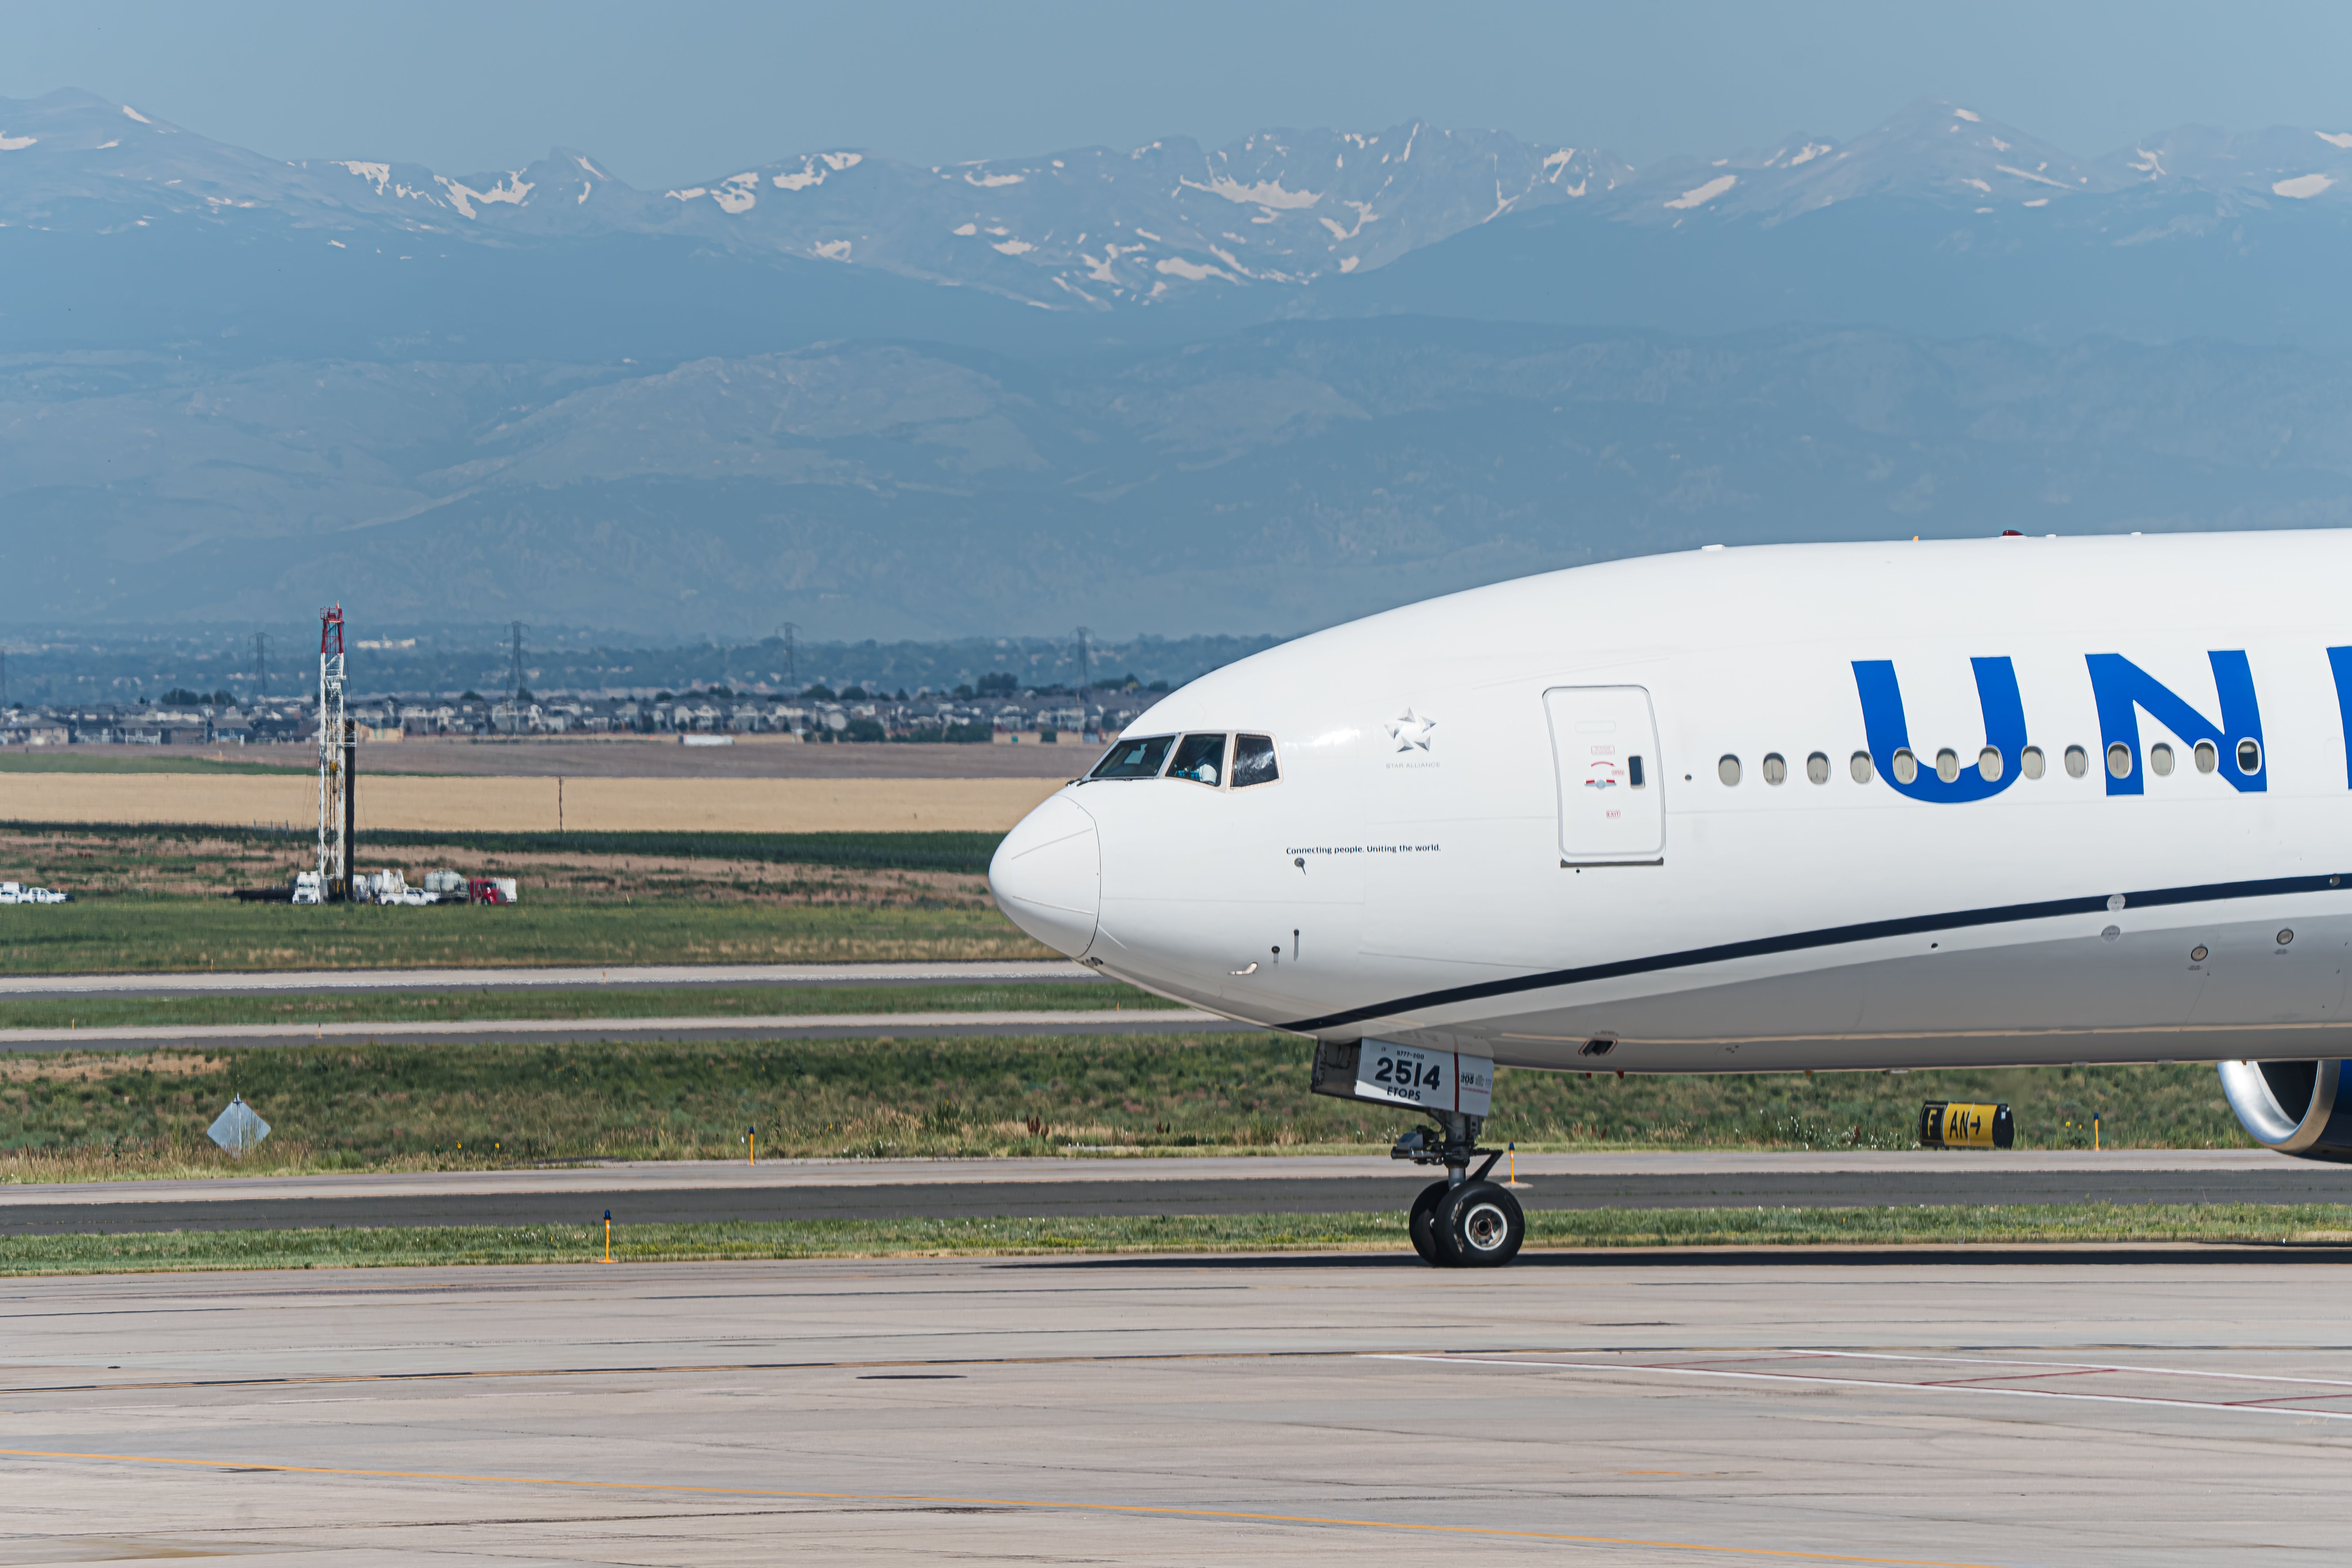 United Airlines Boeing 777 taxiing in DEN